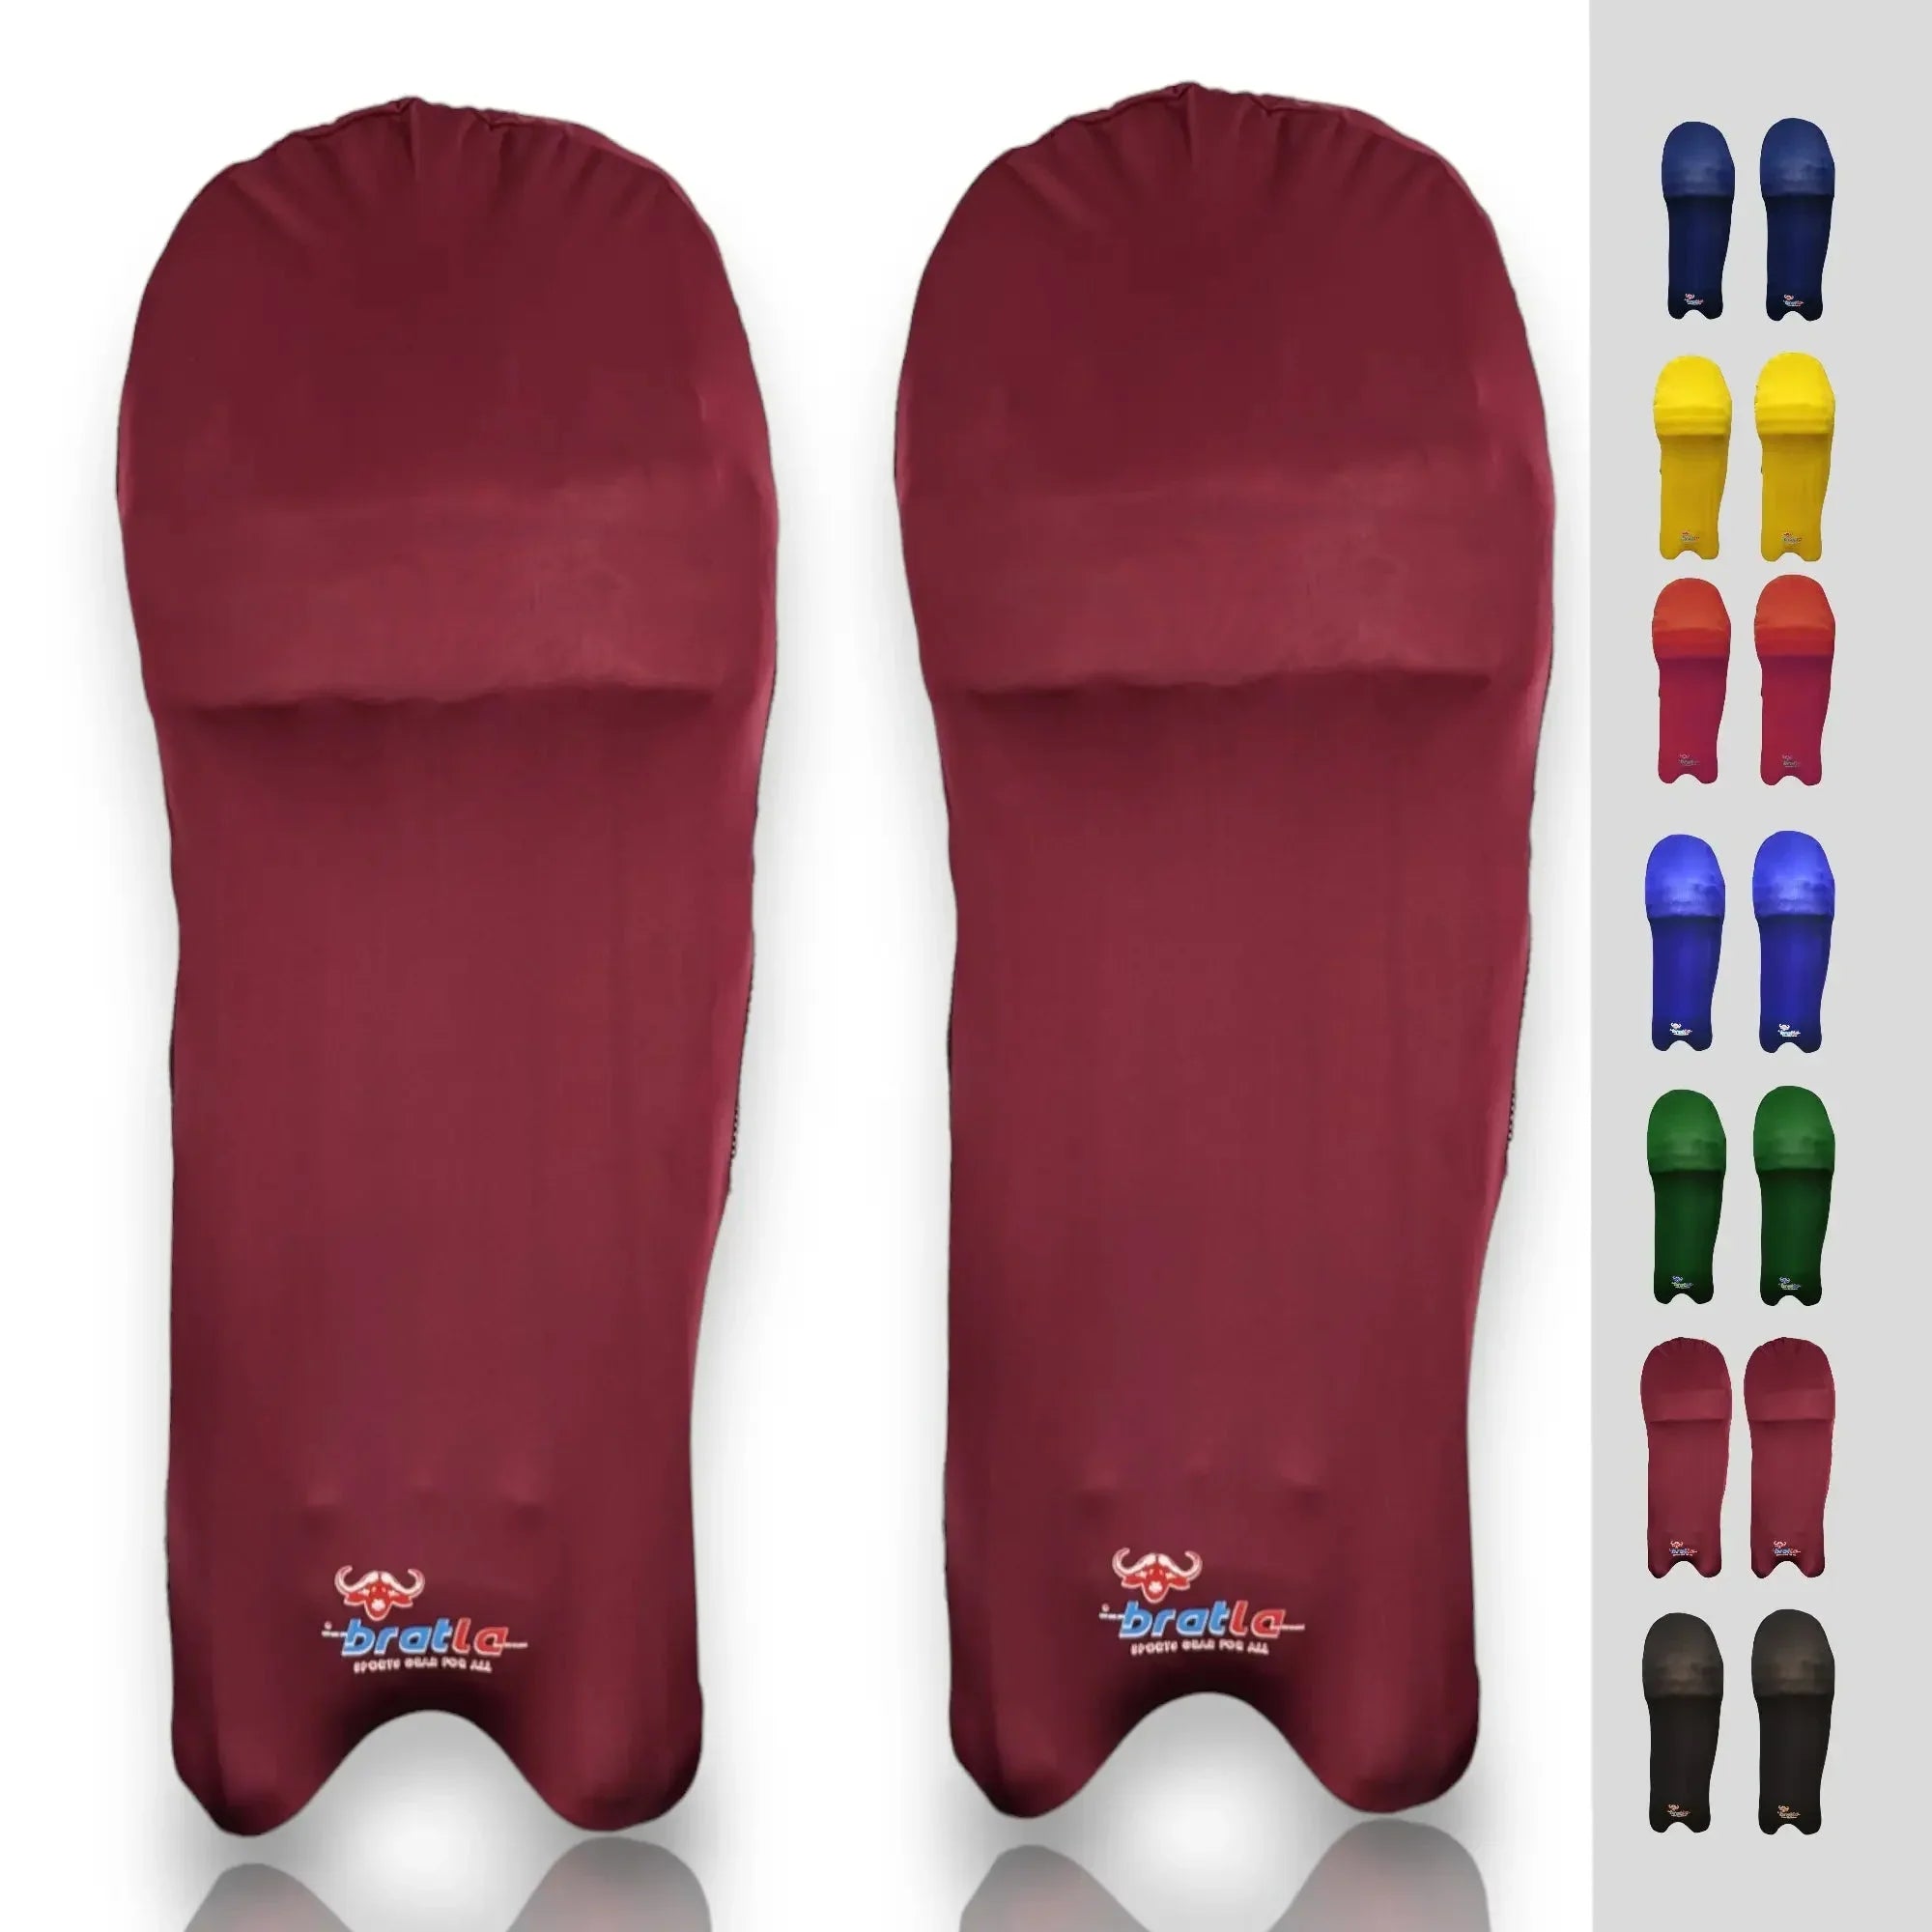 Bratla Cricket Batting Pad Covers Fit Neatly Easily Put On - Maroon - PADS - BATTING COVER